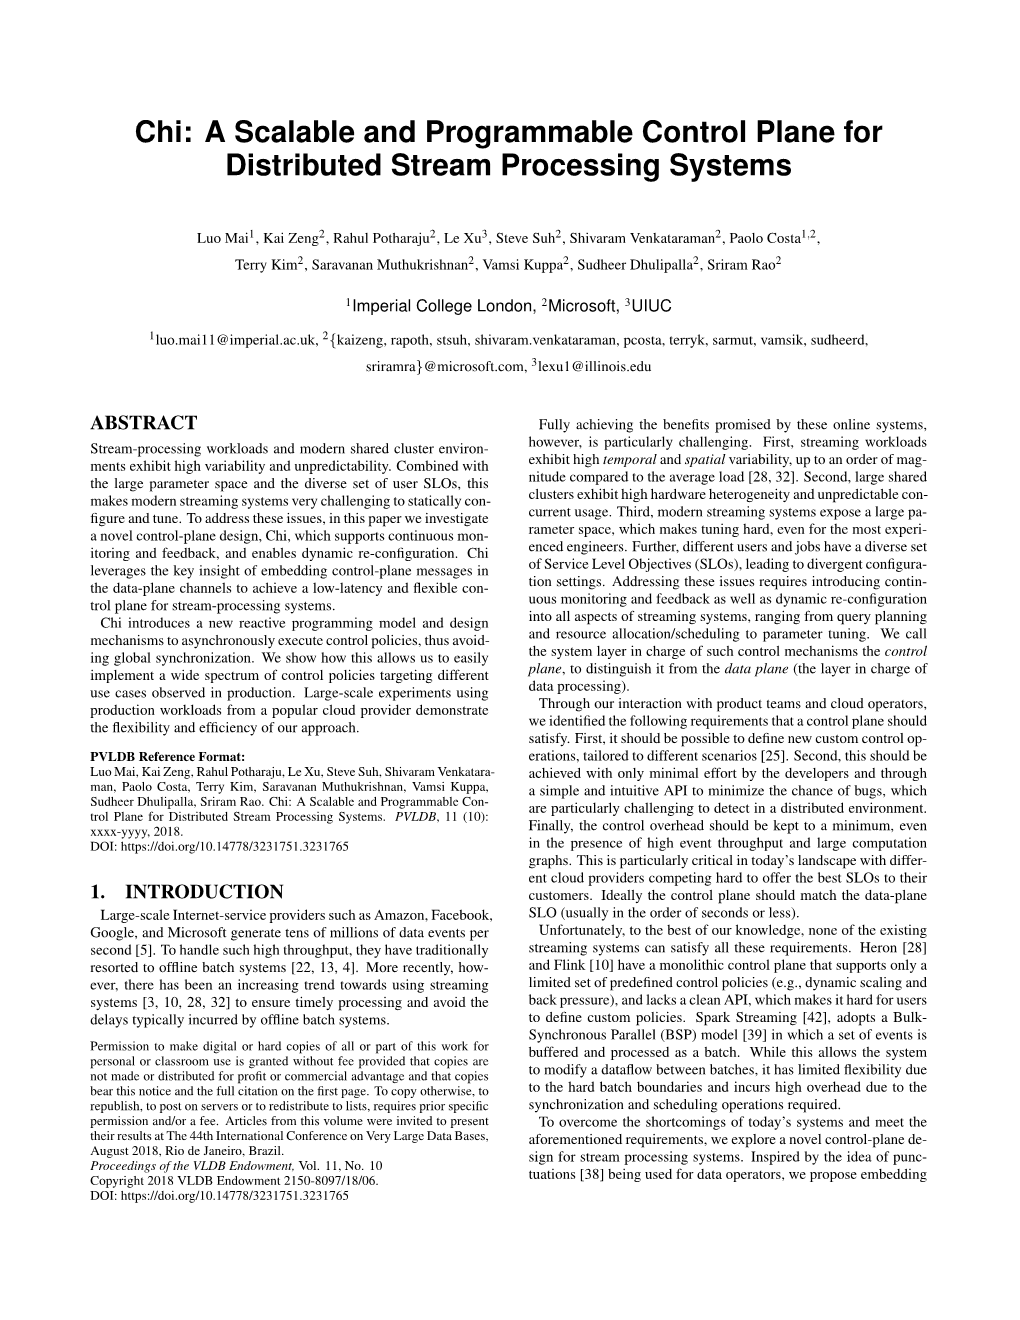 Chi: a Scalable and Programmable Control Plane for Distributed Stream Processing Systems